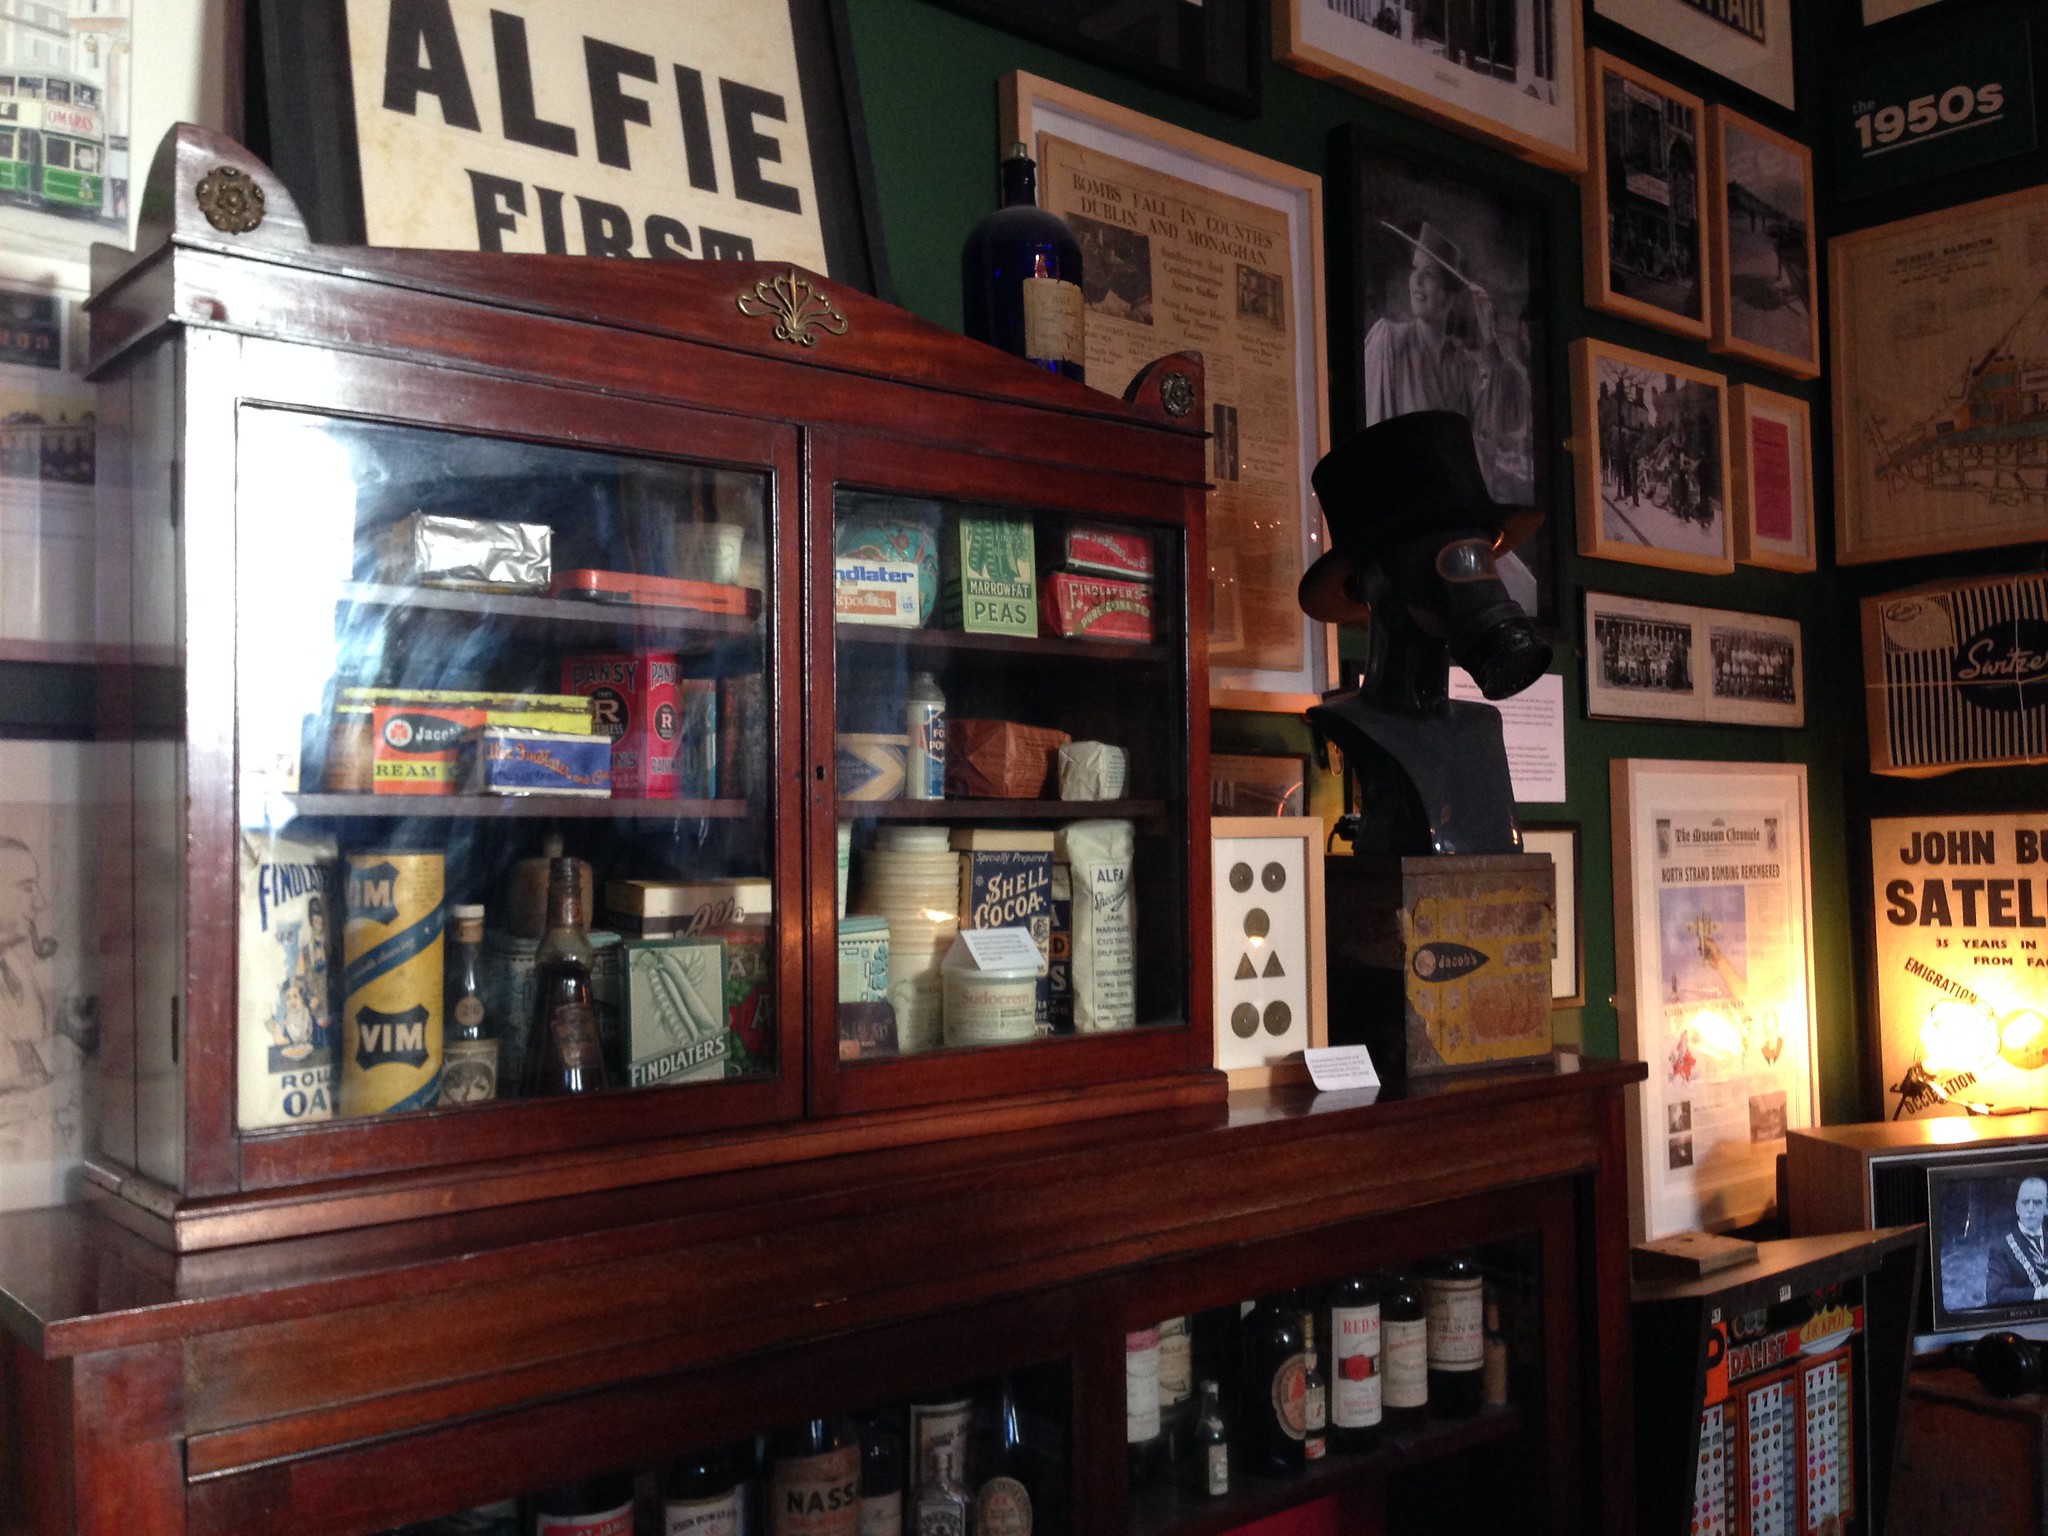 Cabinet filled with antique goods and bottles, gas mask with hat, and framed historical prints at and exhibit in the Little Museum of Dublin, one of the best places to visit in Ireland